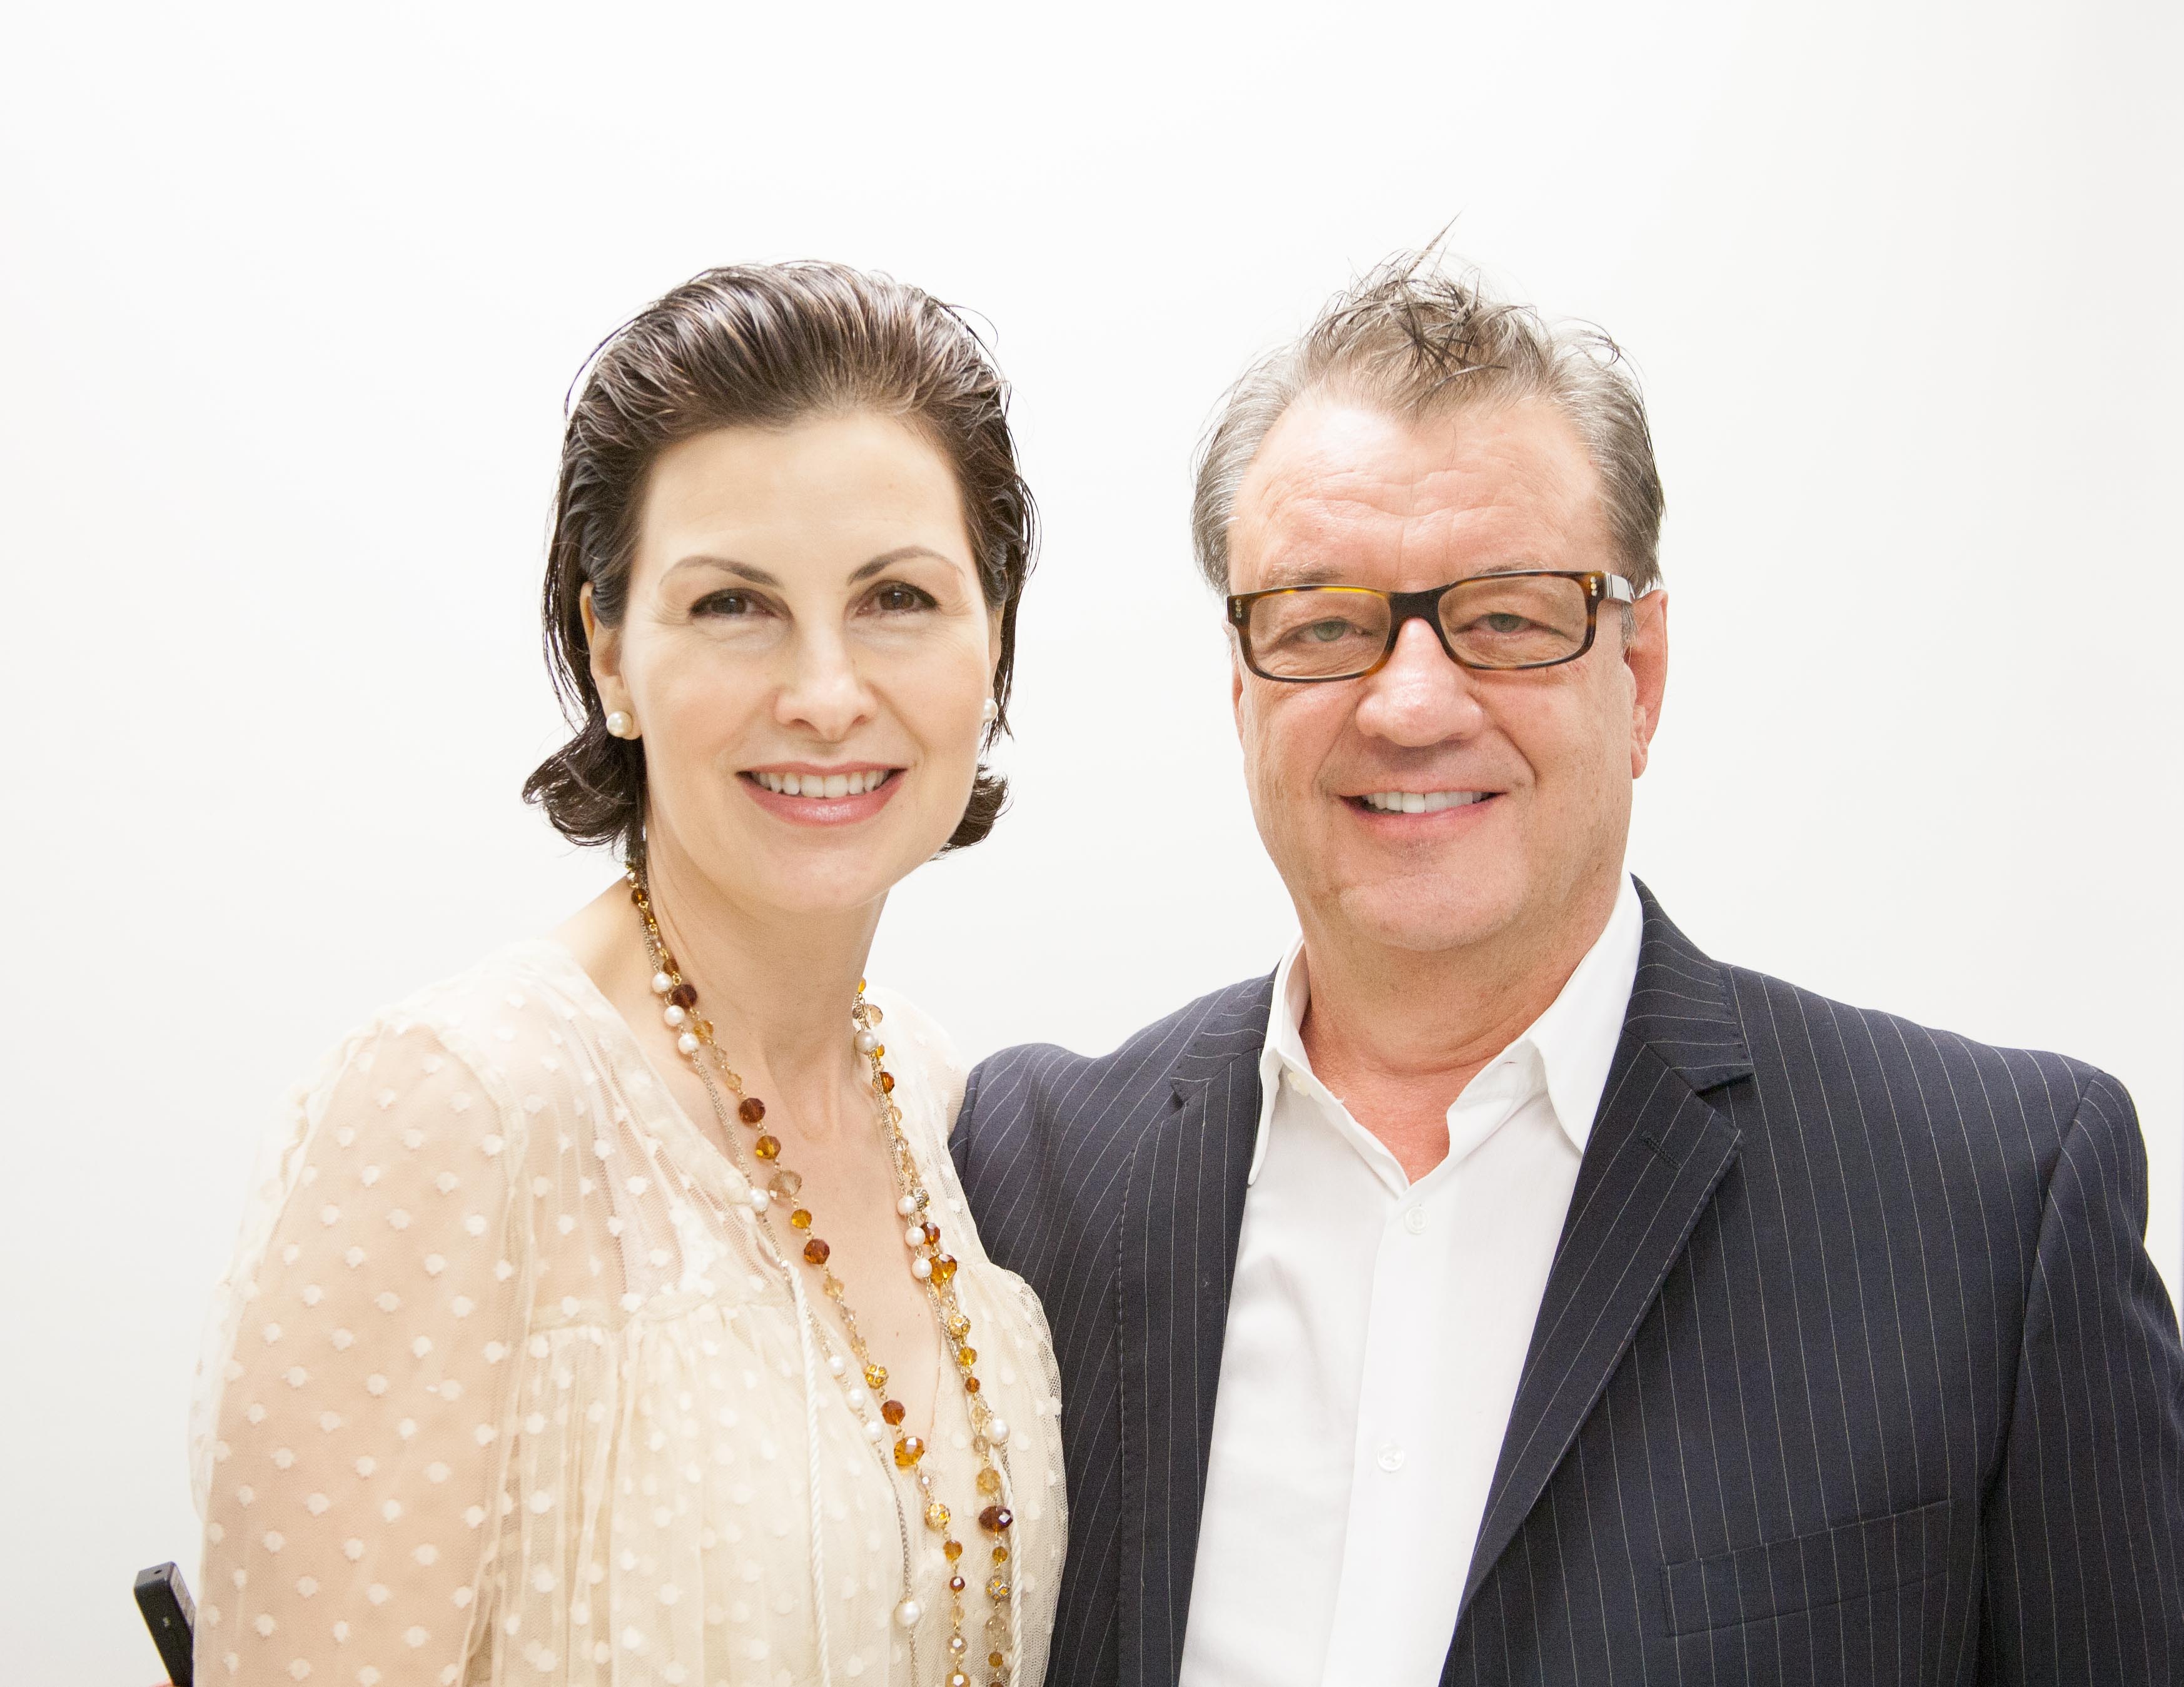 Westlake Village's The Spiga Protocol founder and beauty expert Annaliza Spiga with Calabasas-based physician David Vesco, M.D.